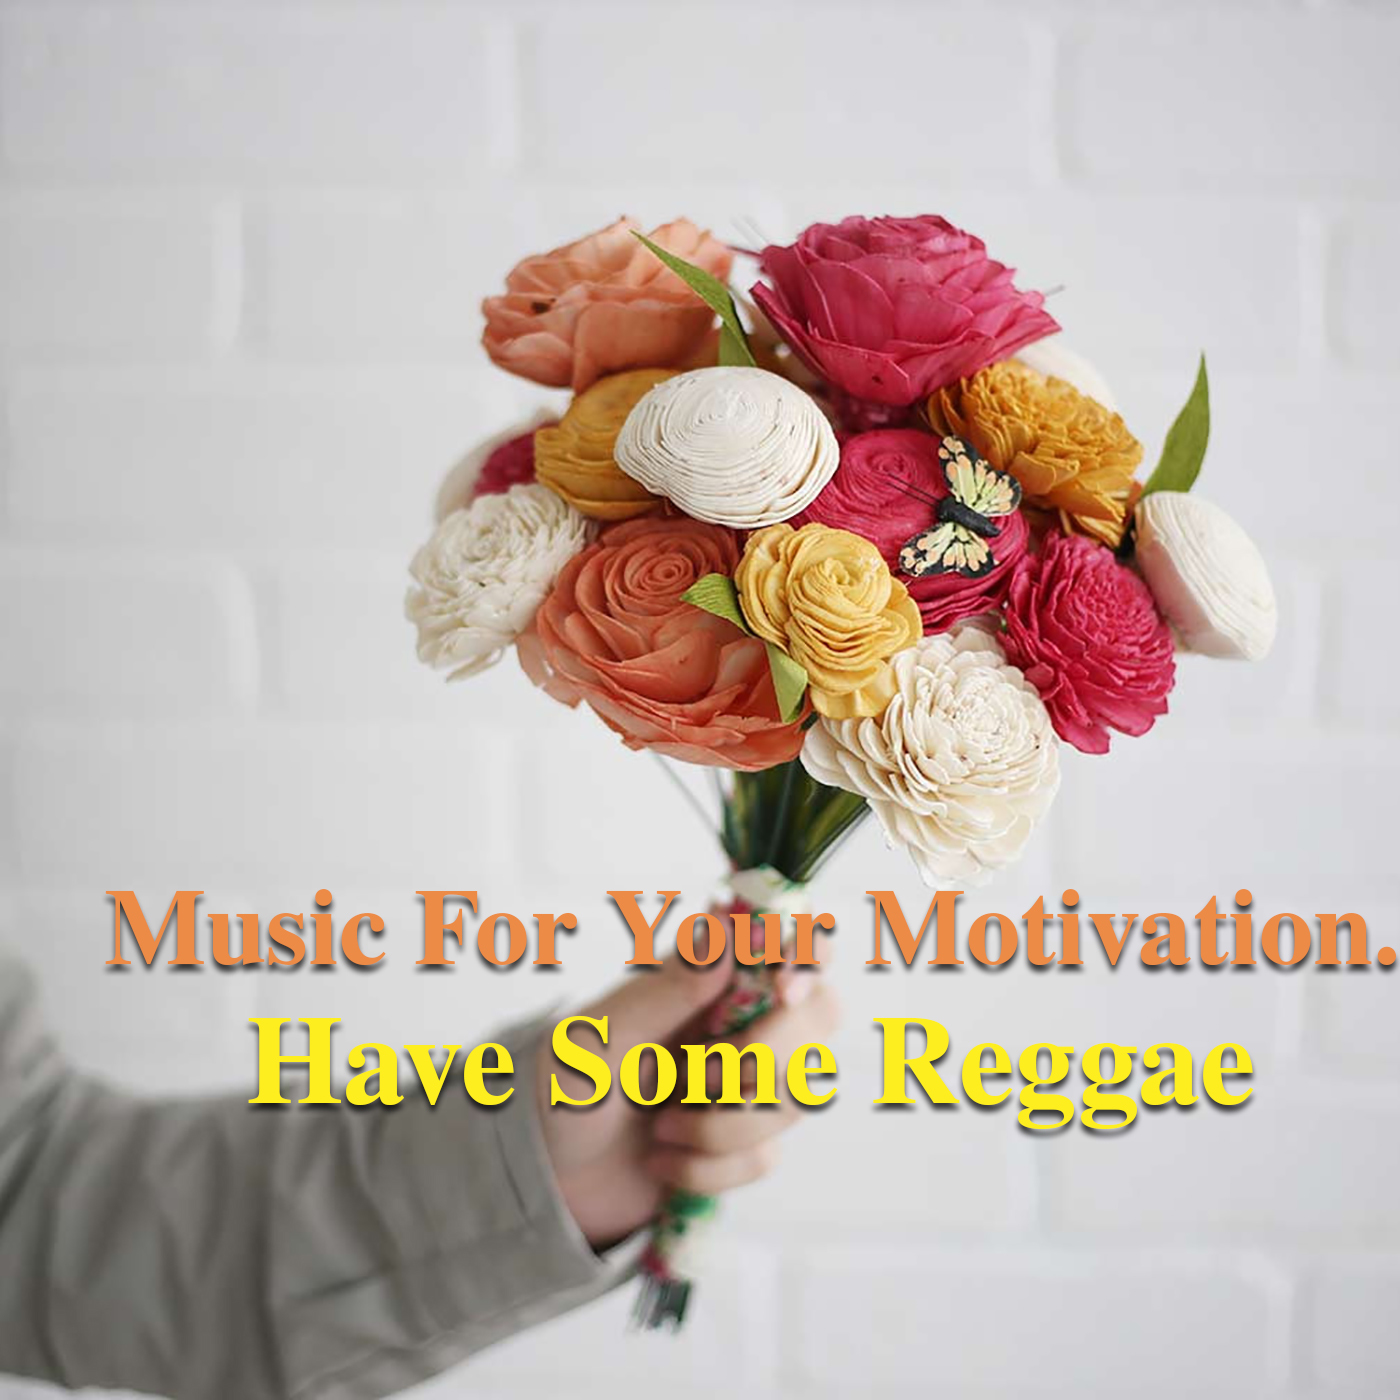 Music For Your Motivation. Have Some Reggae